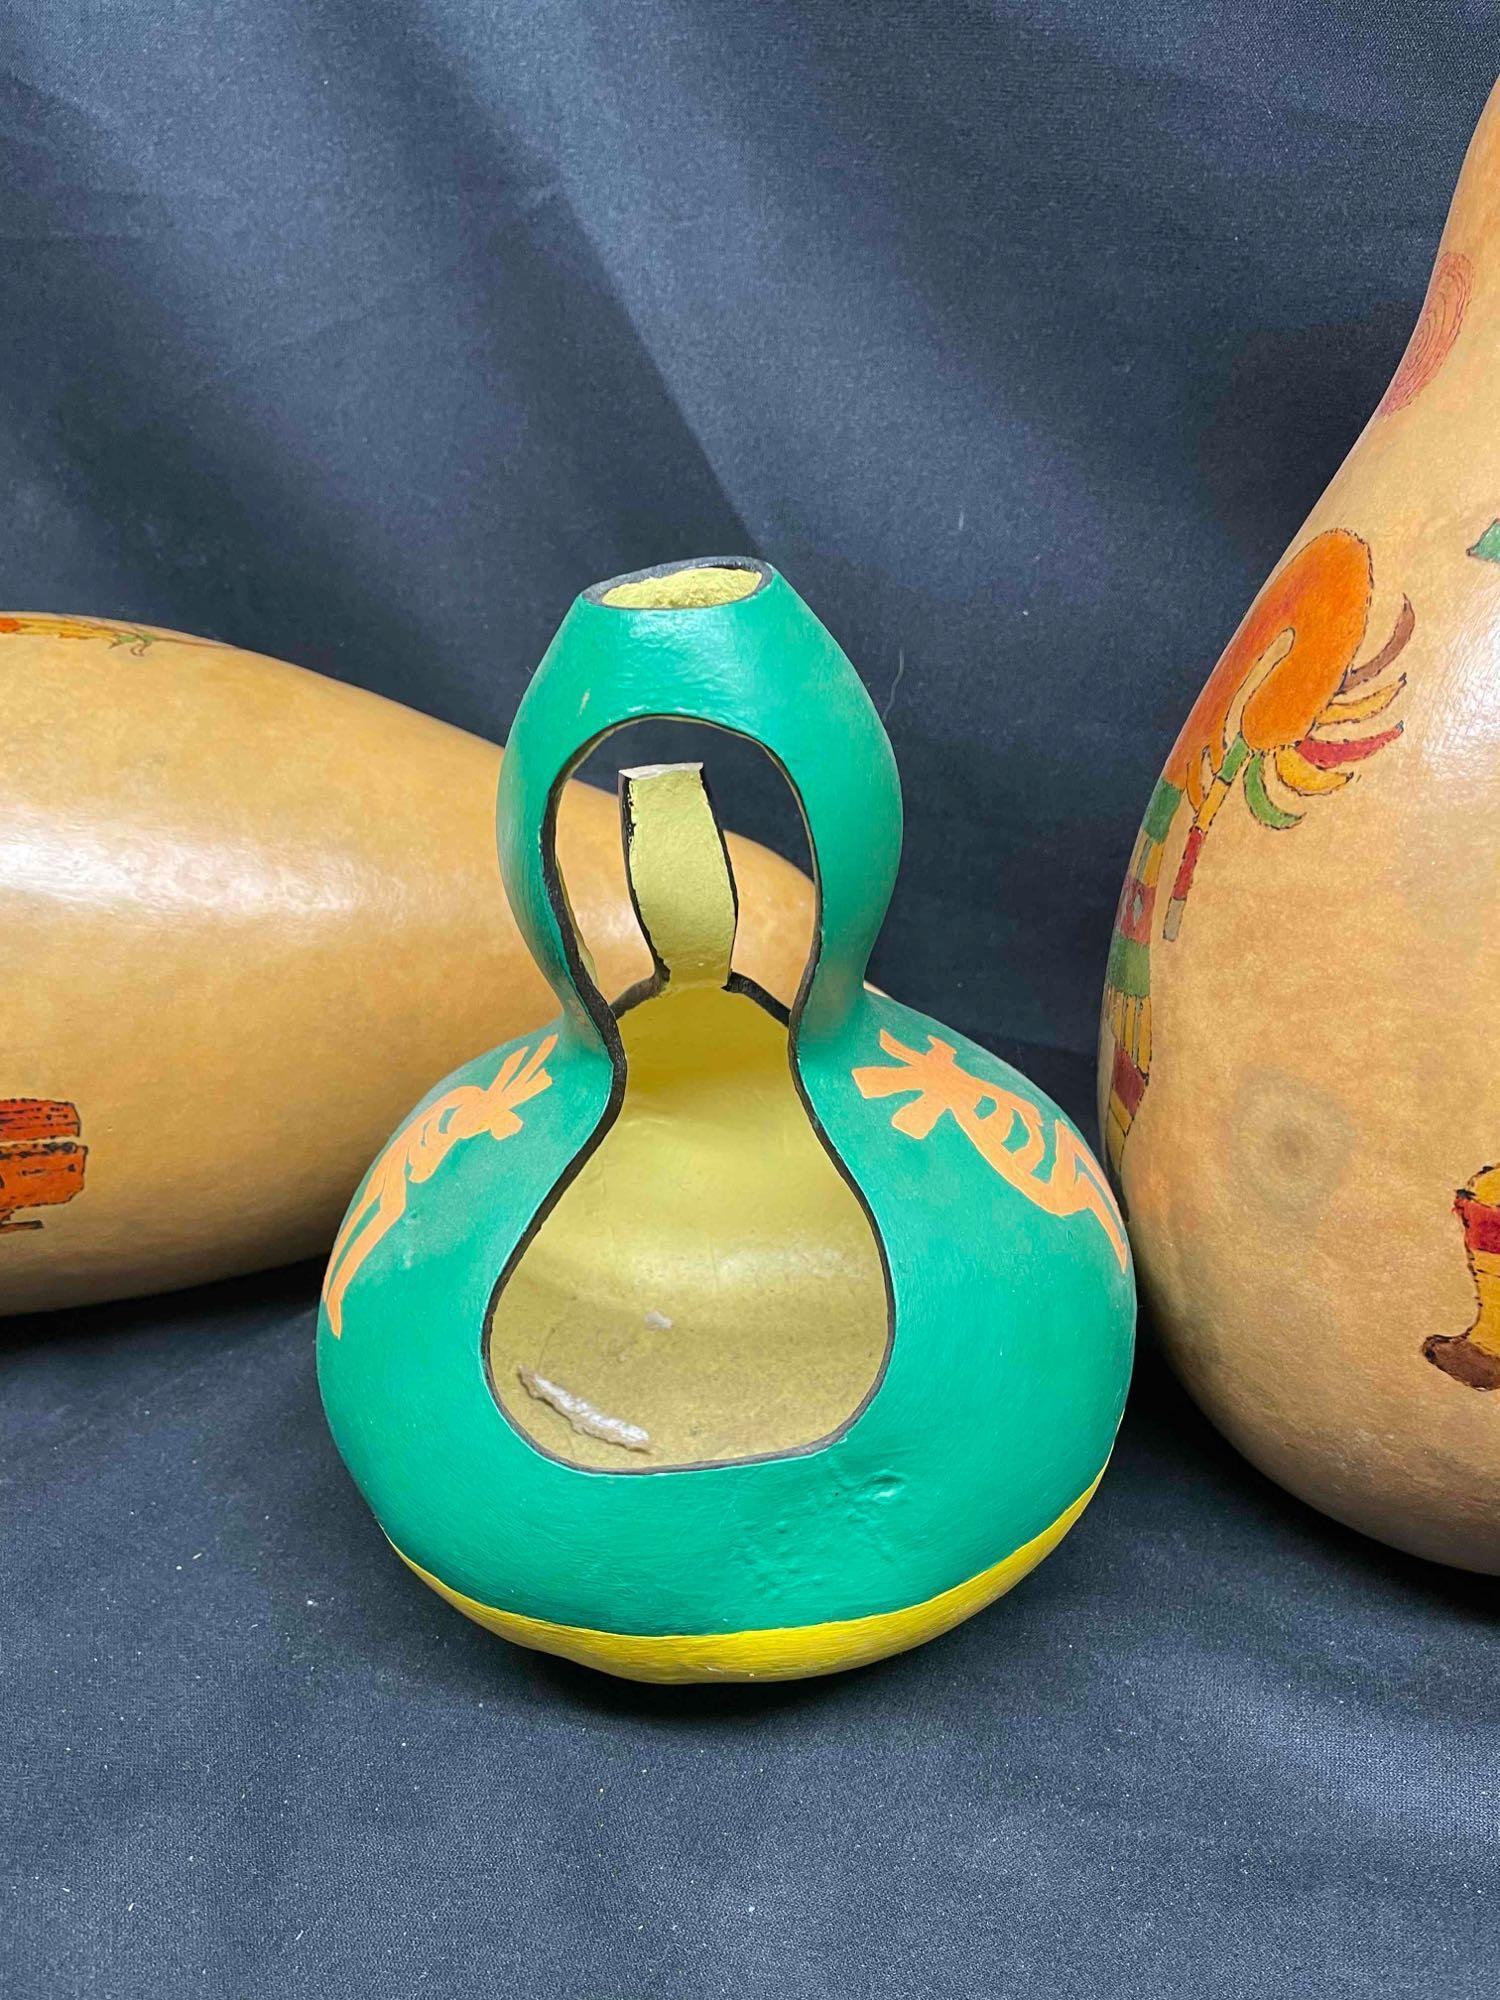 Gourds with Native American Art. Done by Local Artist. Marked DRM 2009-2012